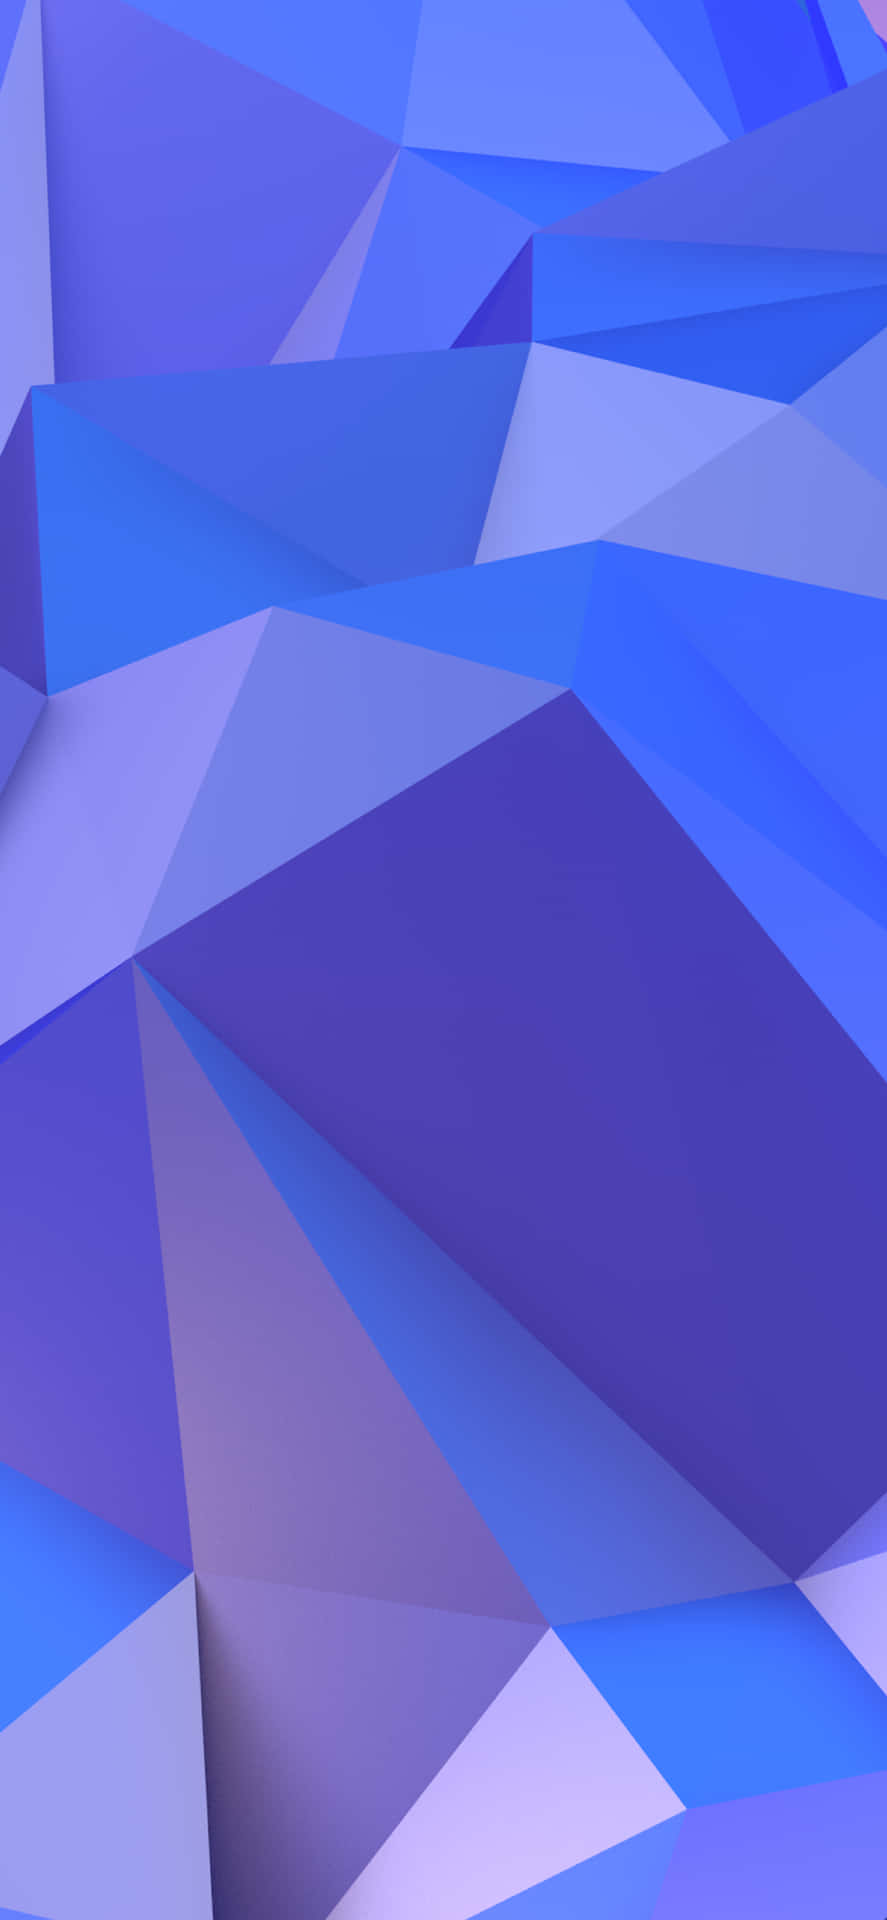 A Blue And Purple Abstract Background With Triangles Wallpaper